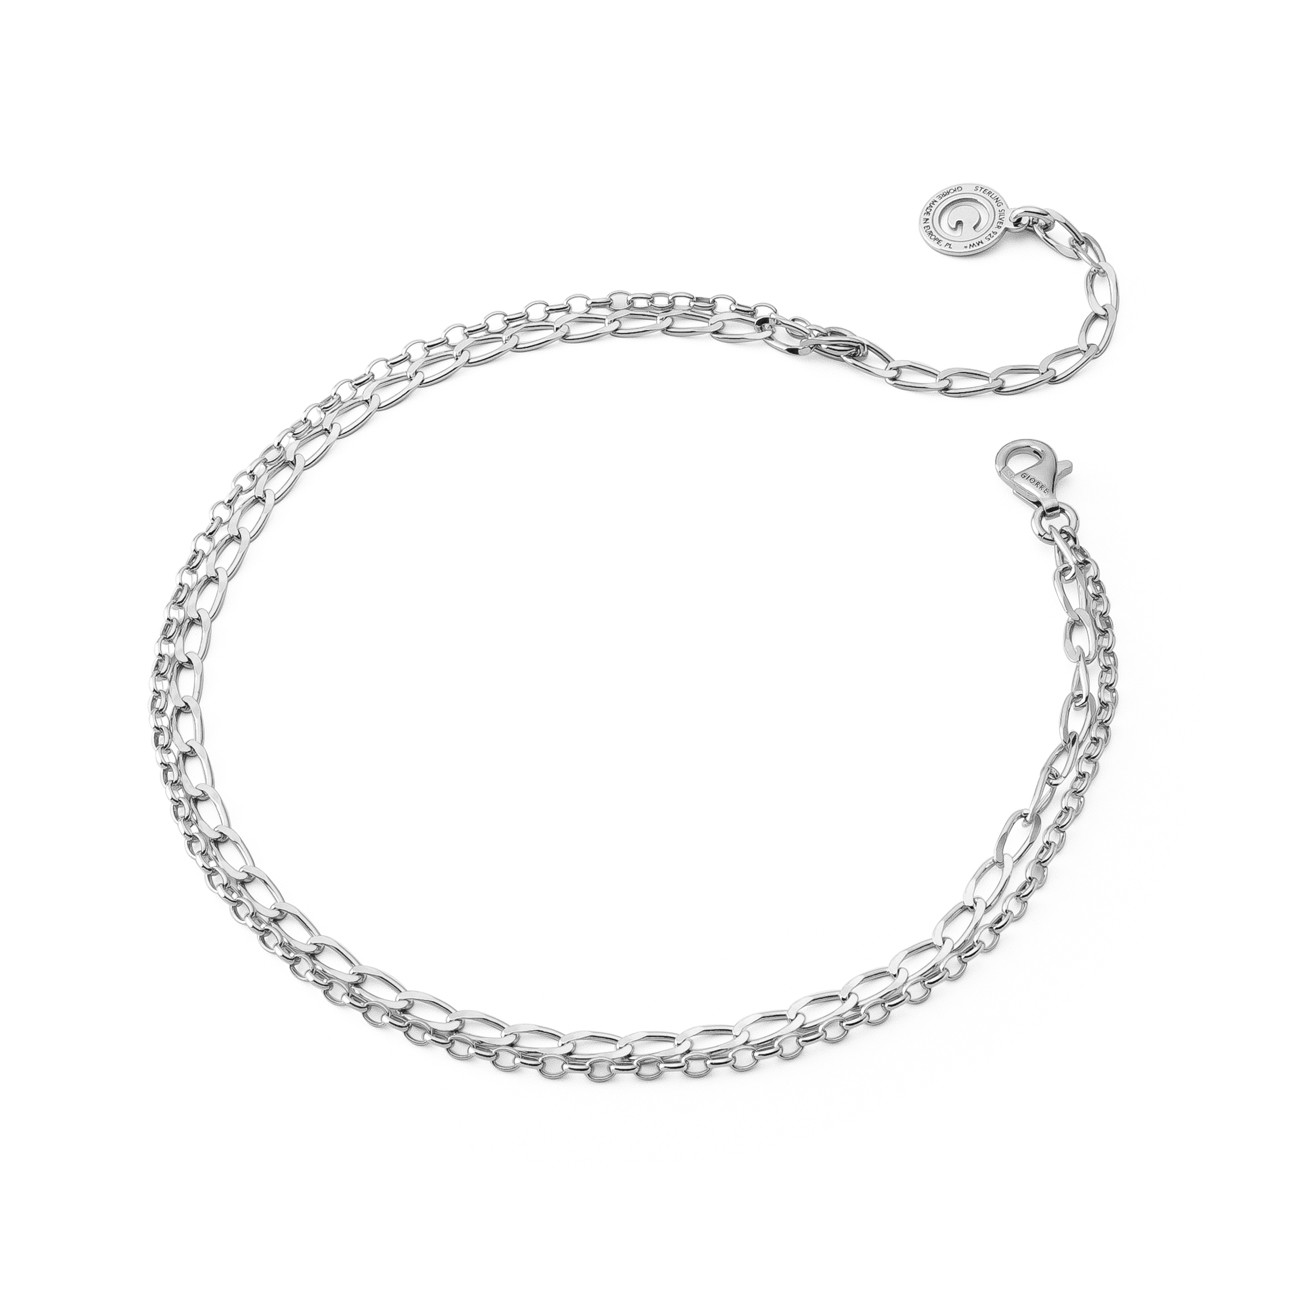 Braided double ankle bracelet, sterling silver 925